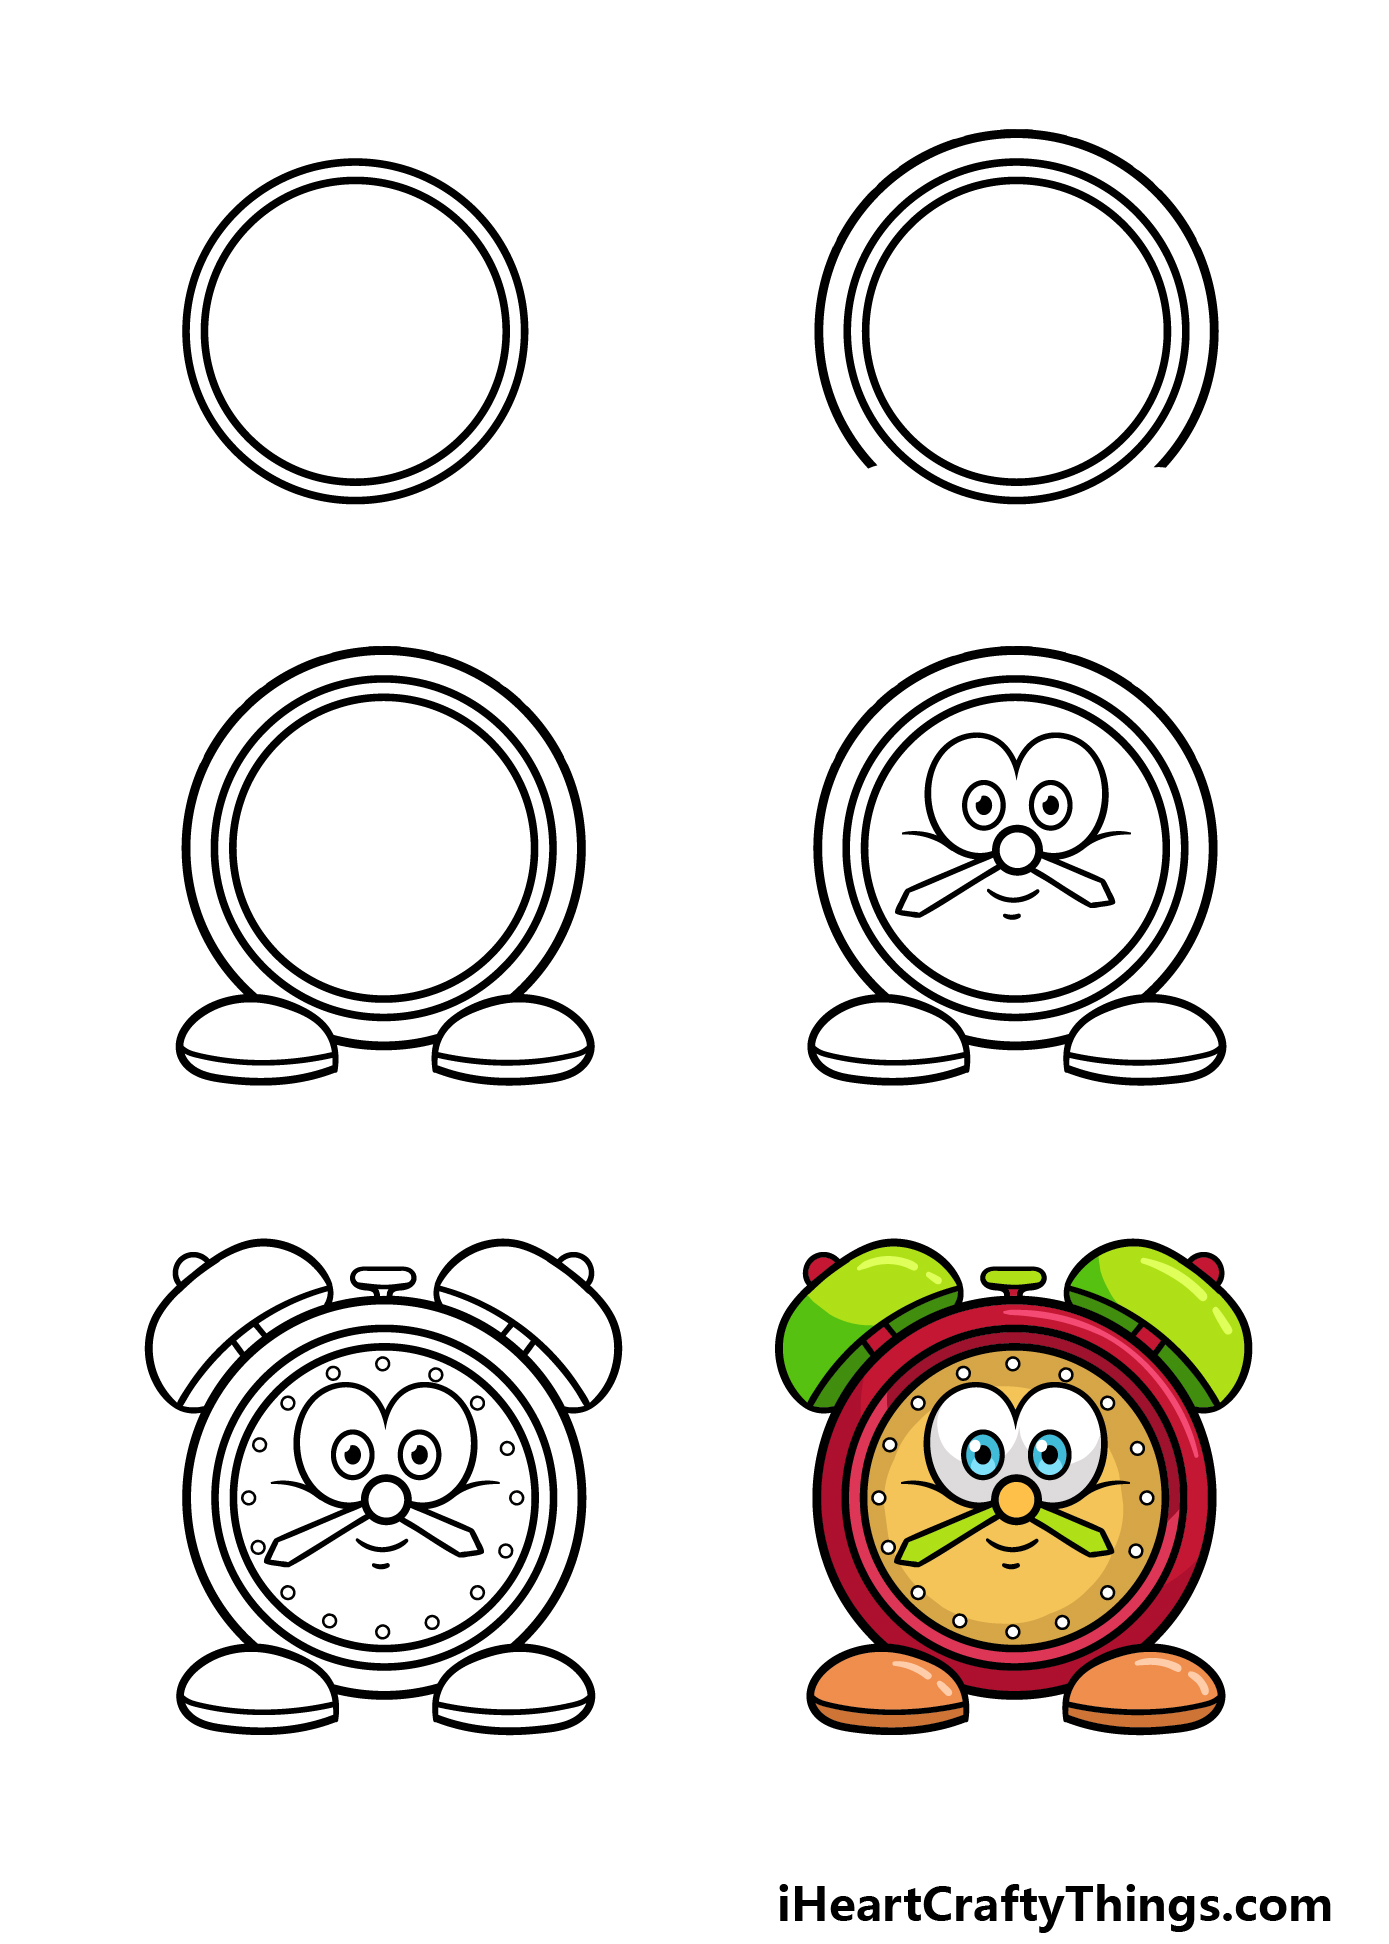 how to draw a cartoon clock in 6 steps